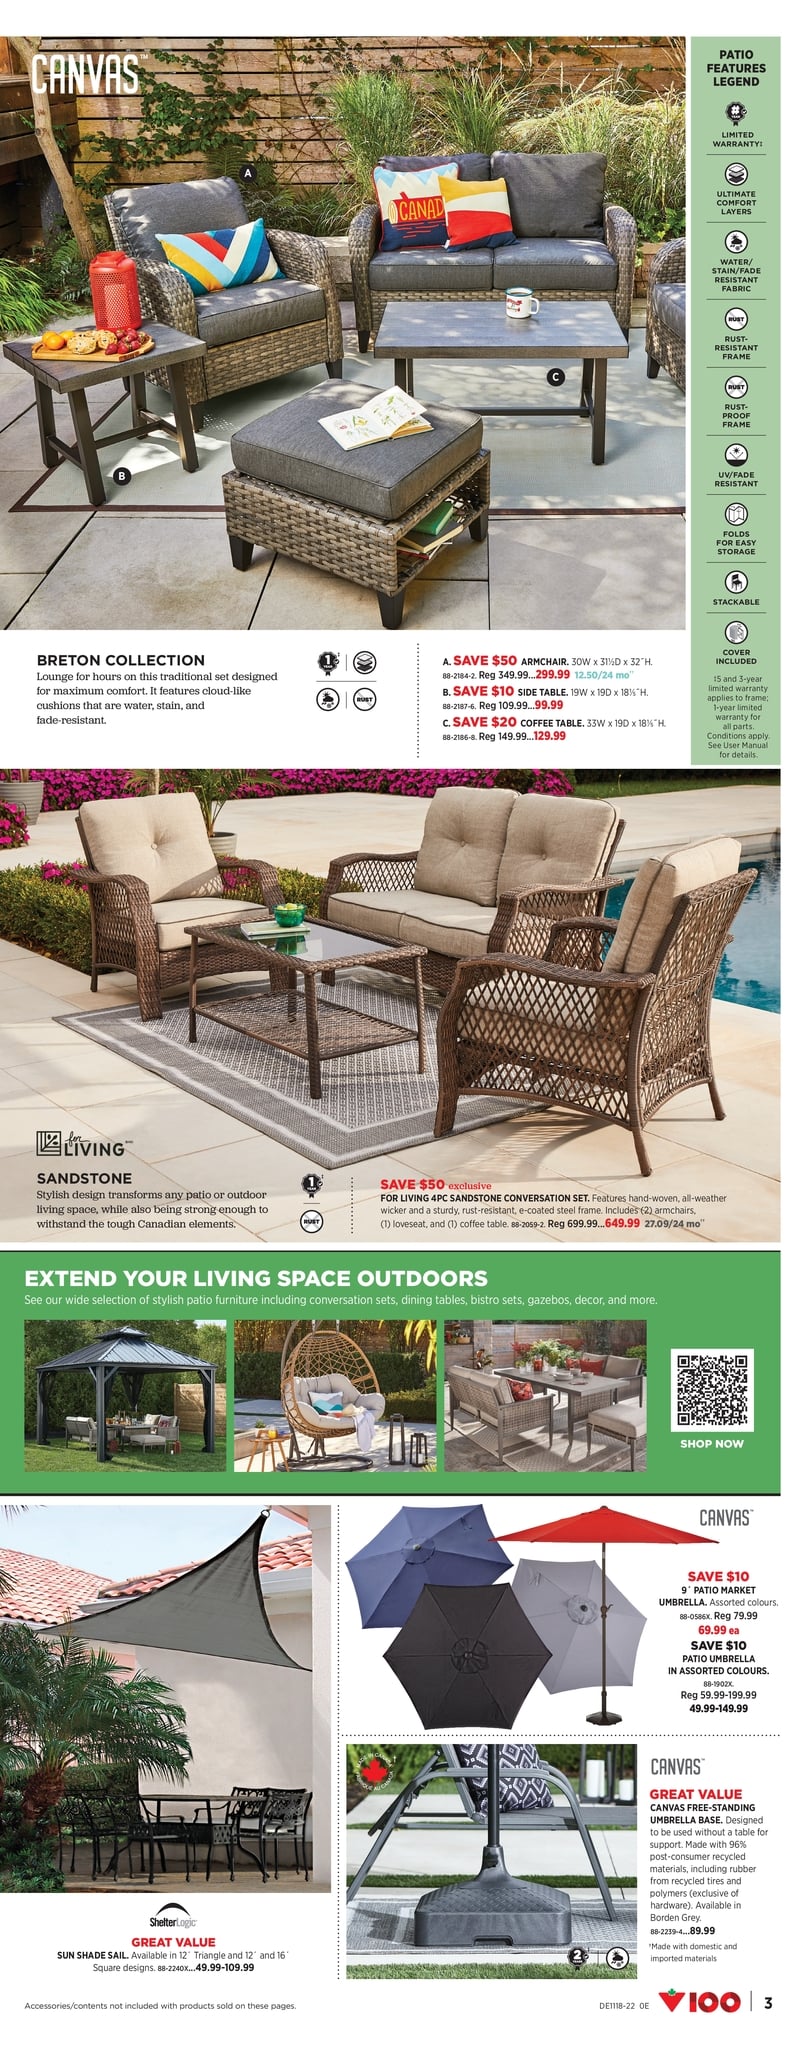 Canadian Tire - Spring Inspirations - Page 3